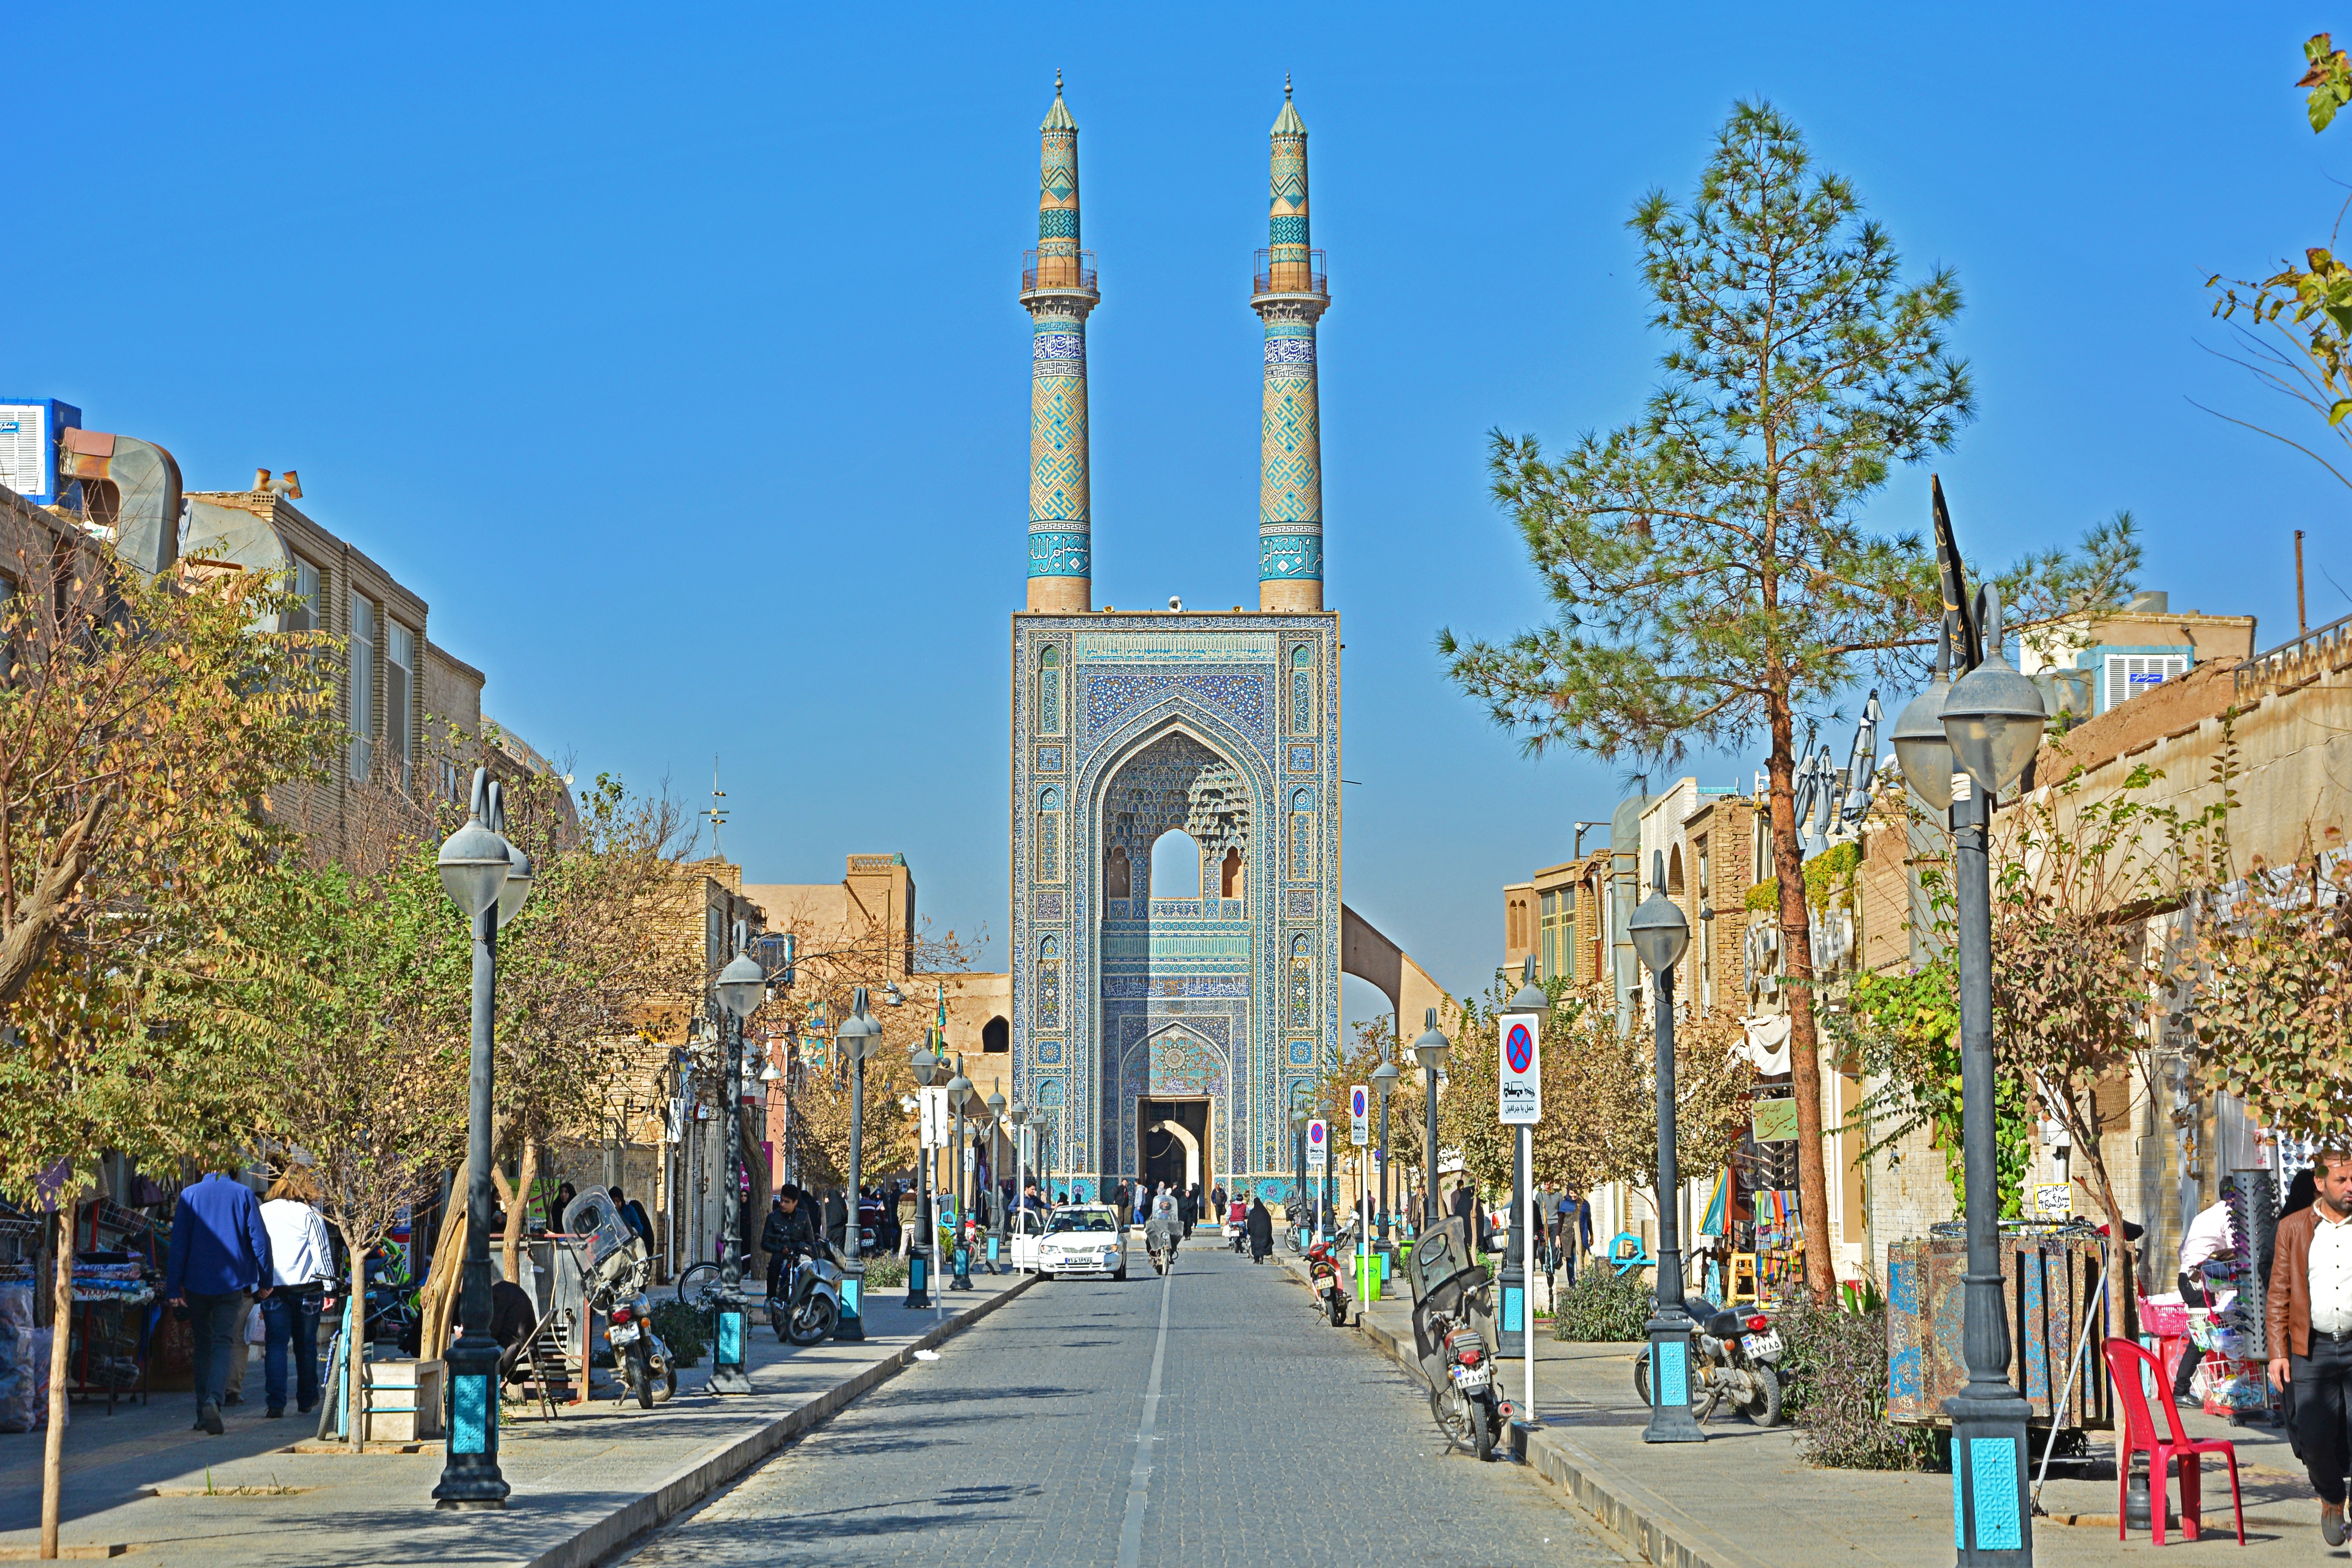 Masjid-e Jame of Yazd welcoming visitors to Old Town